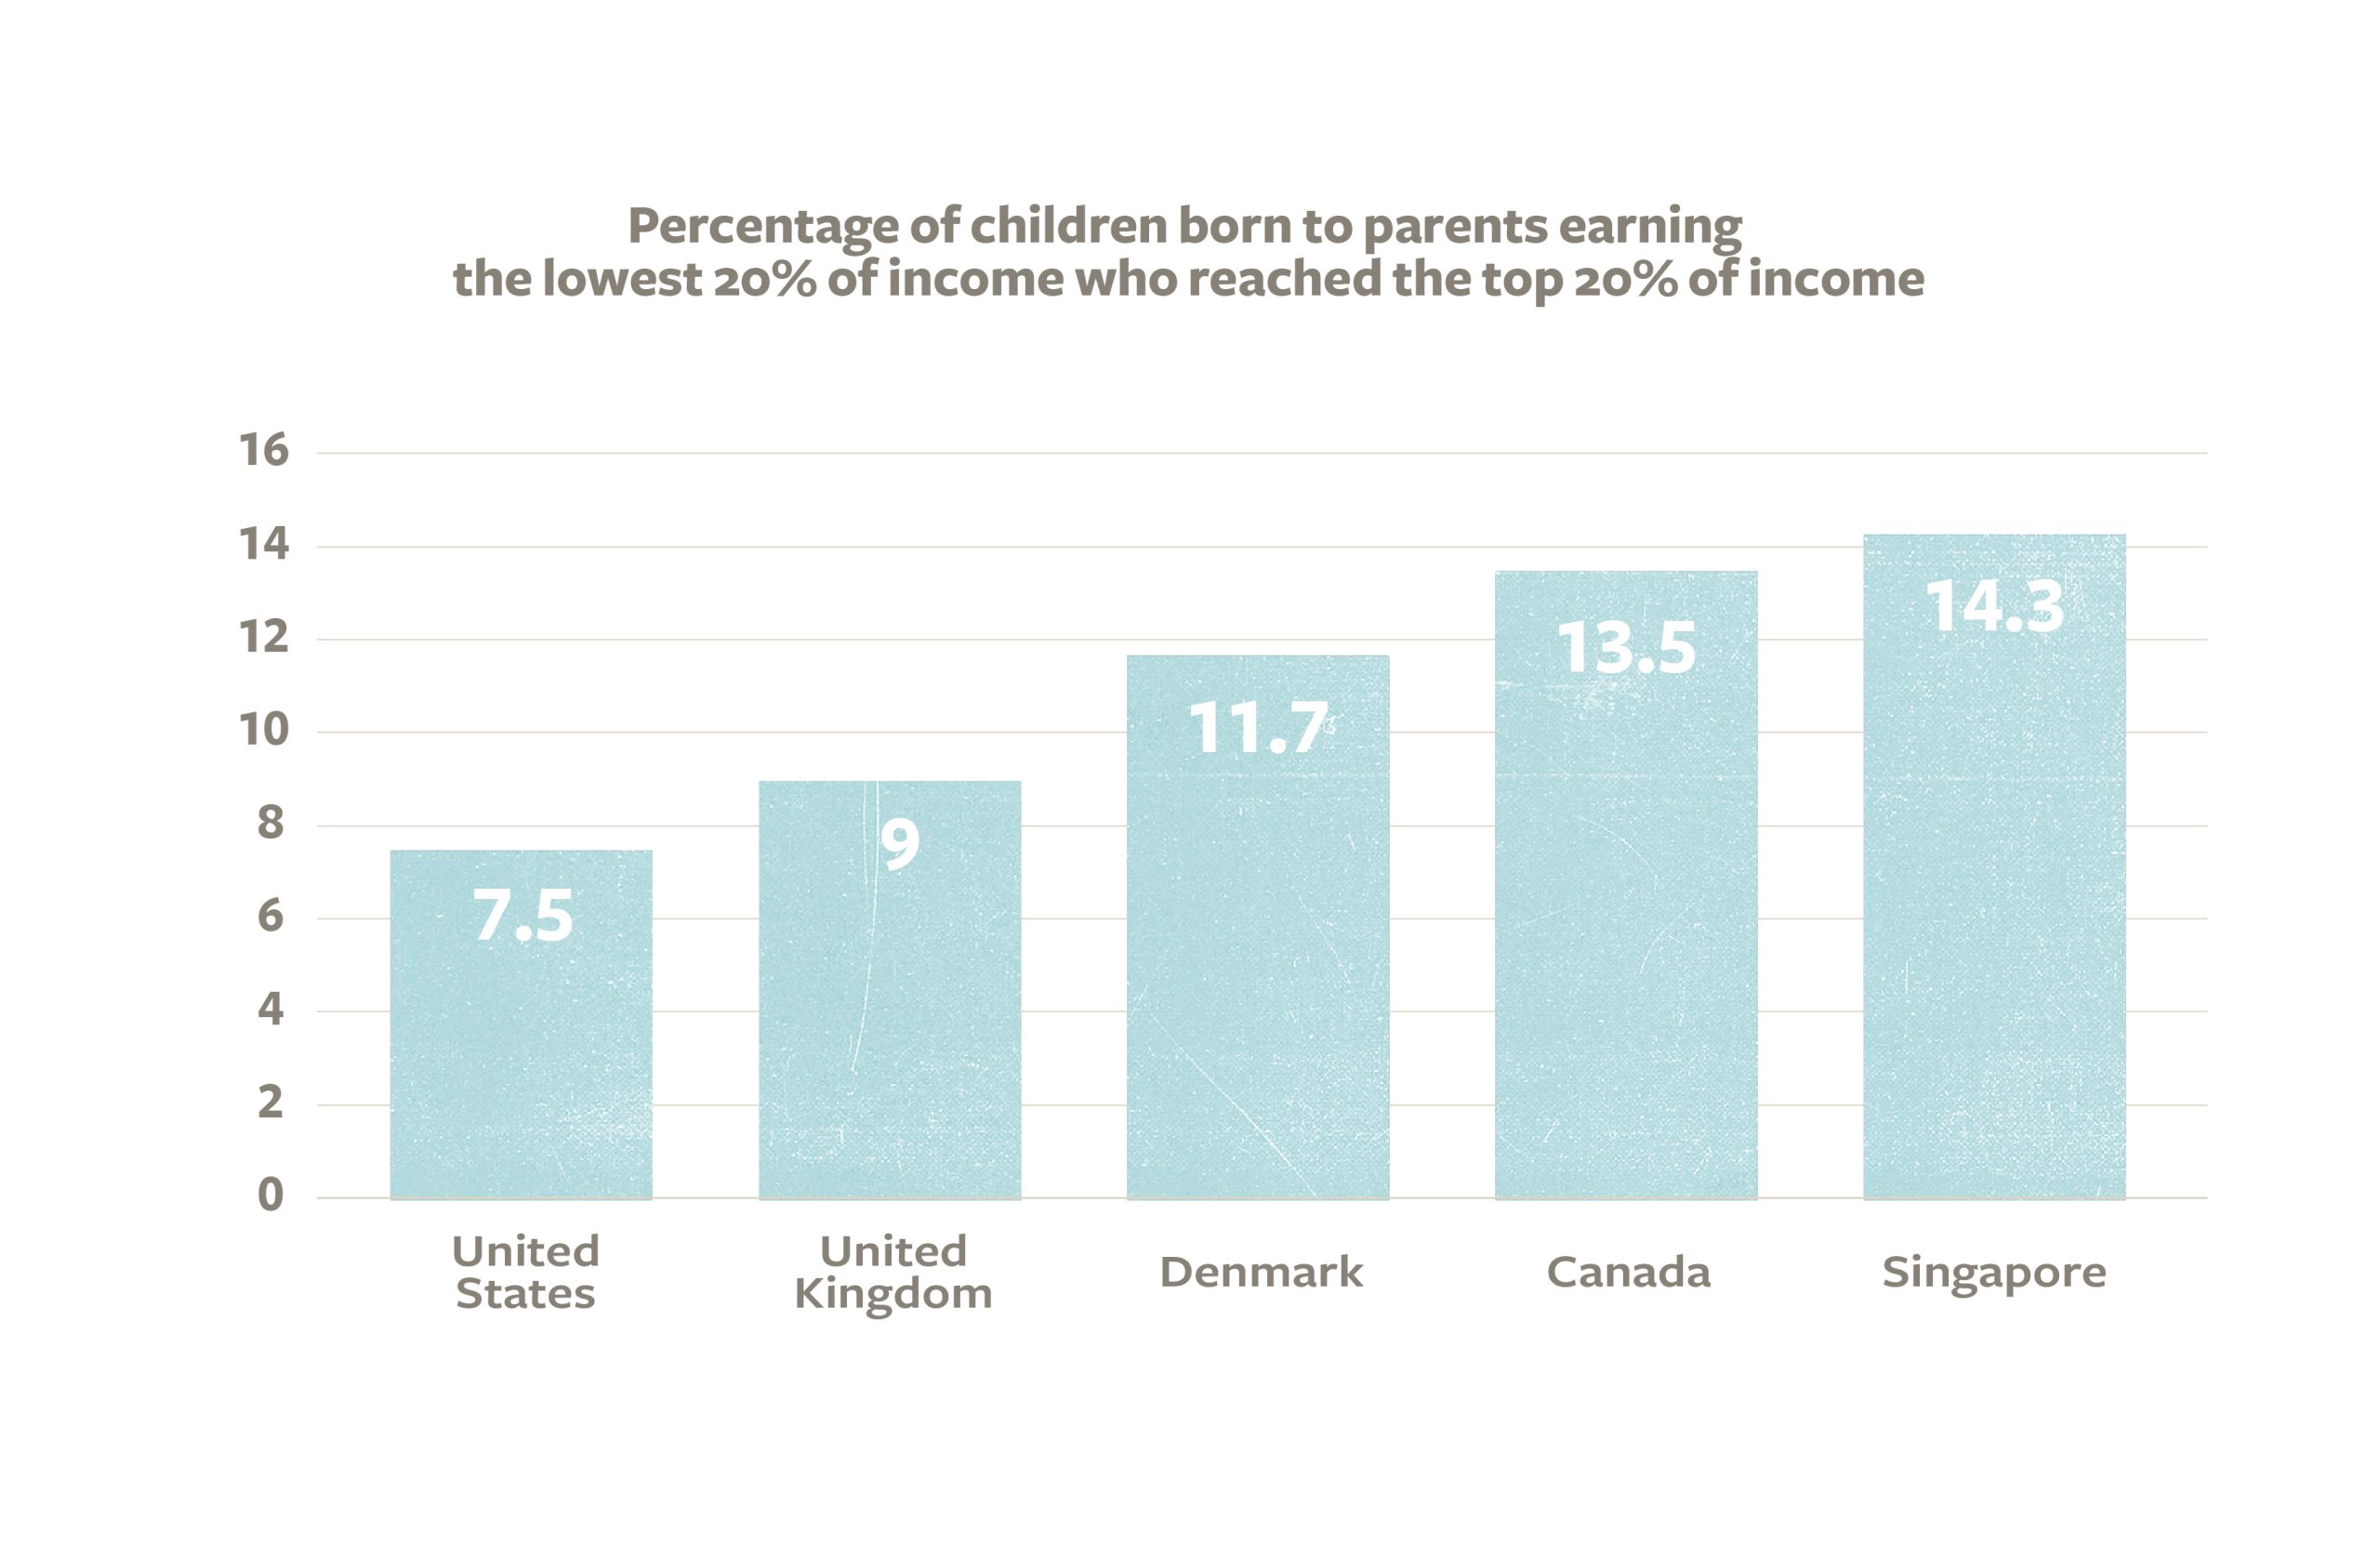 Figure 11: Percentage of Children Born to Parents Earning the Lowest 20 percent of Income Who Reached the Top 20 percent of Income. Source: Ministry of Finance (2015). 